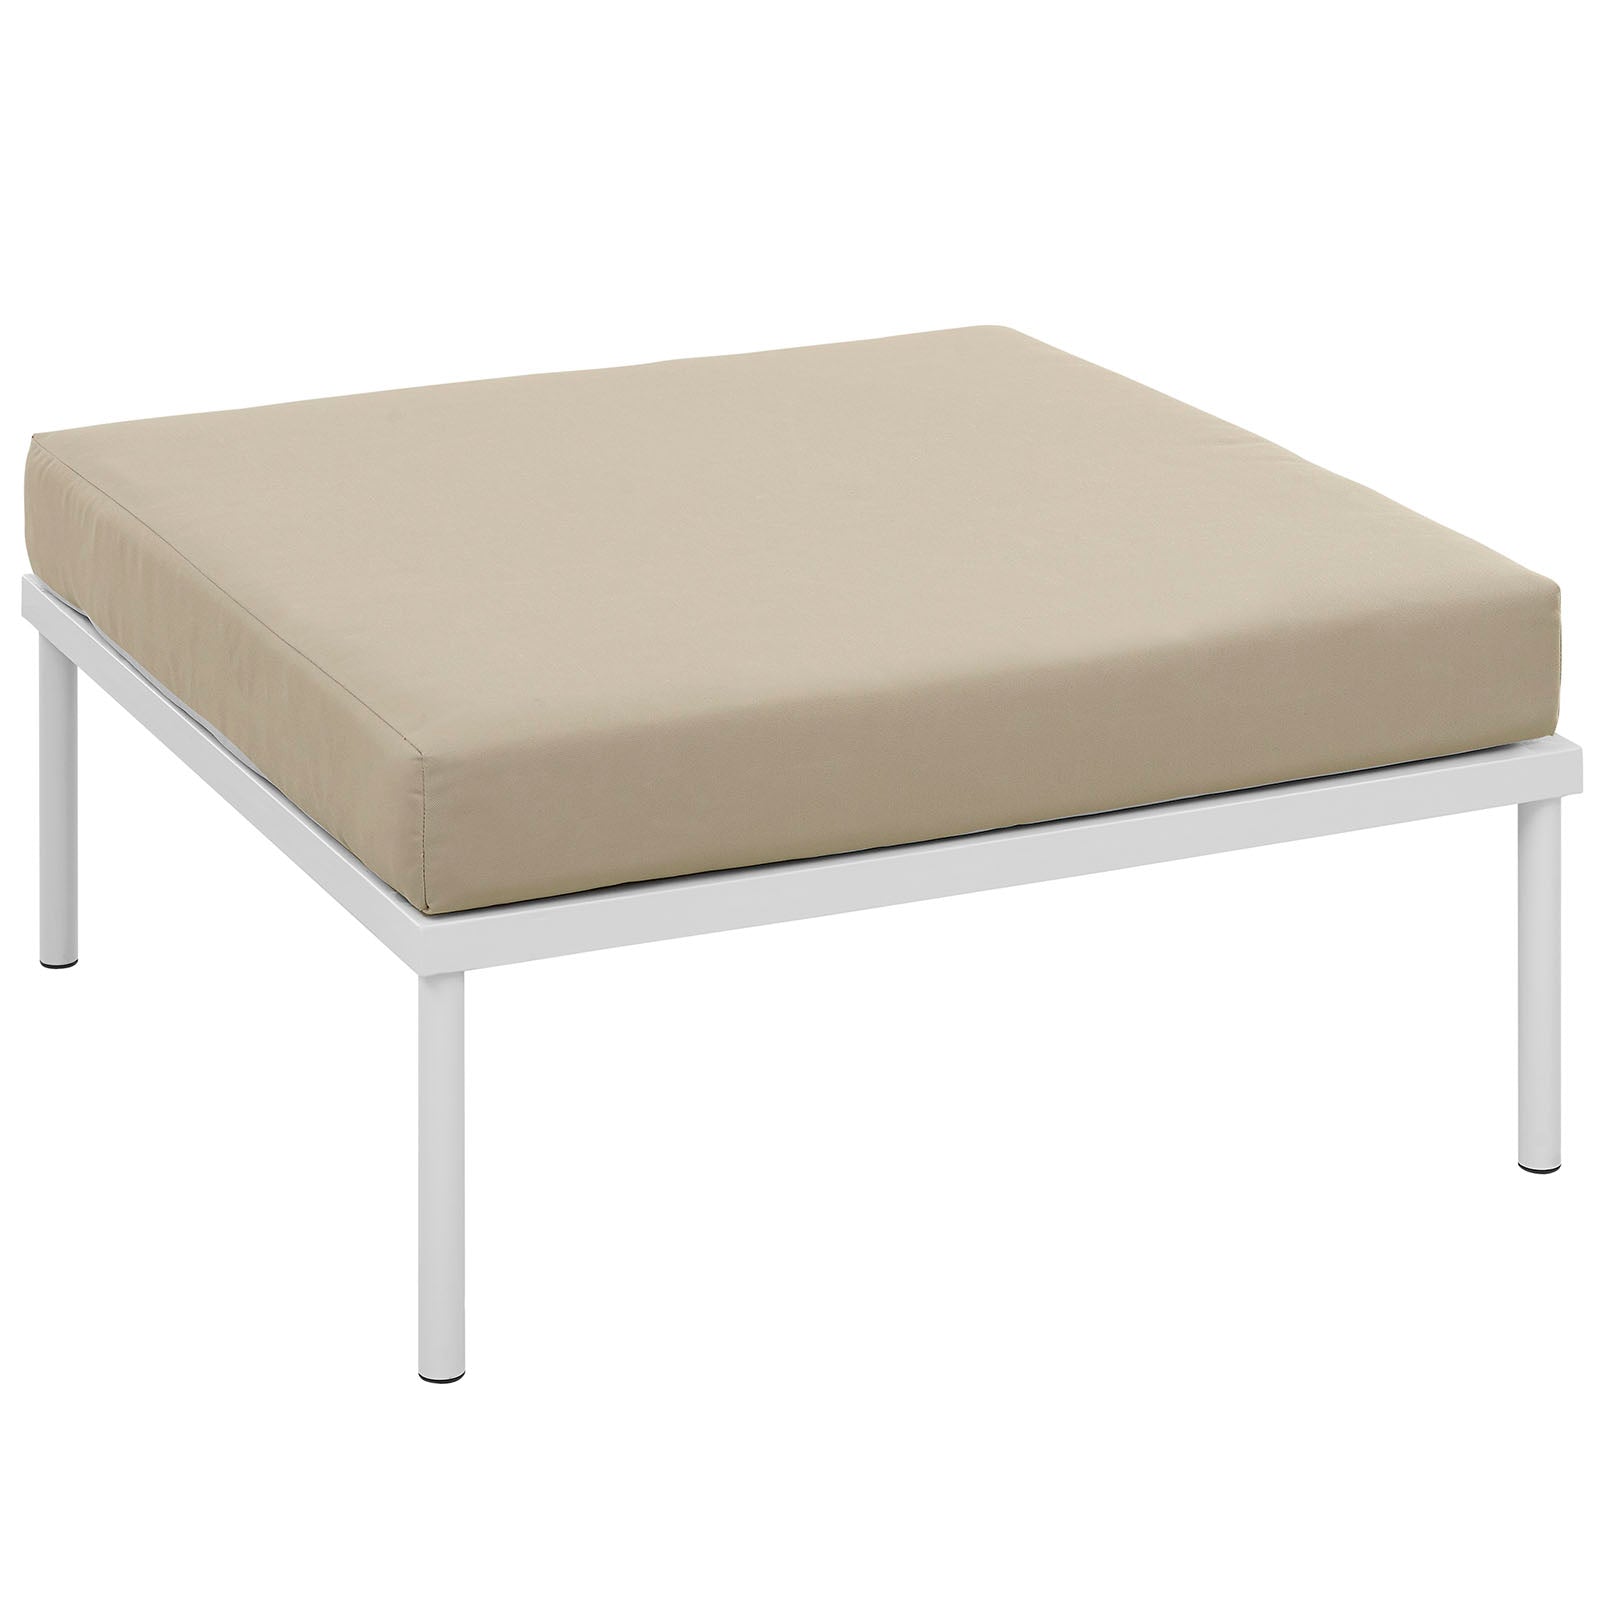 Modway Outdoor Stools & Benches - Harmony Outdoor Patio Aluminum Ottoman White Beige